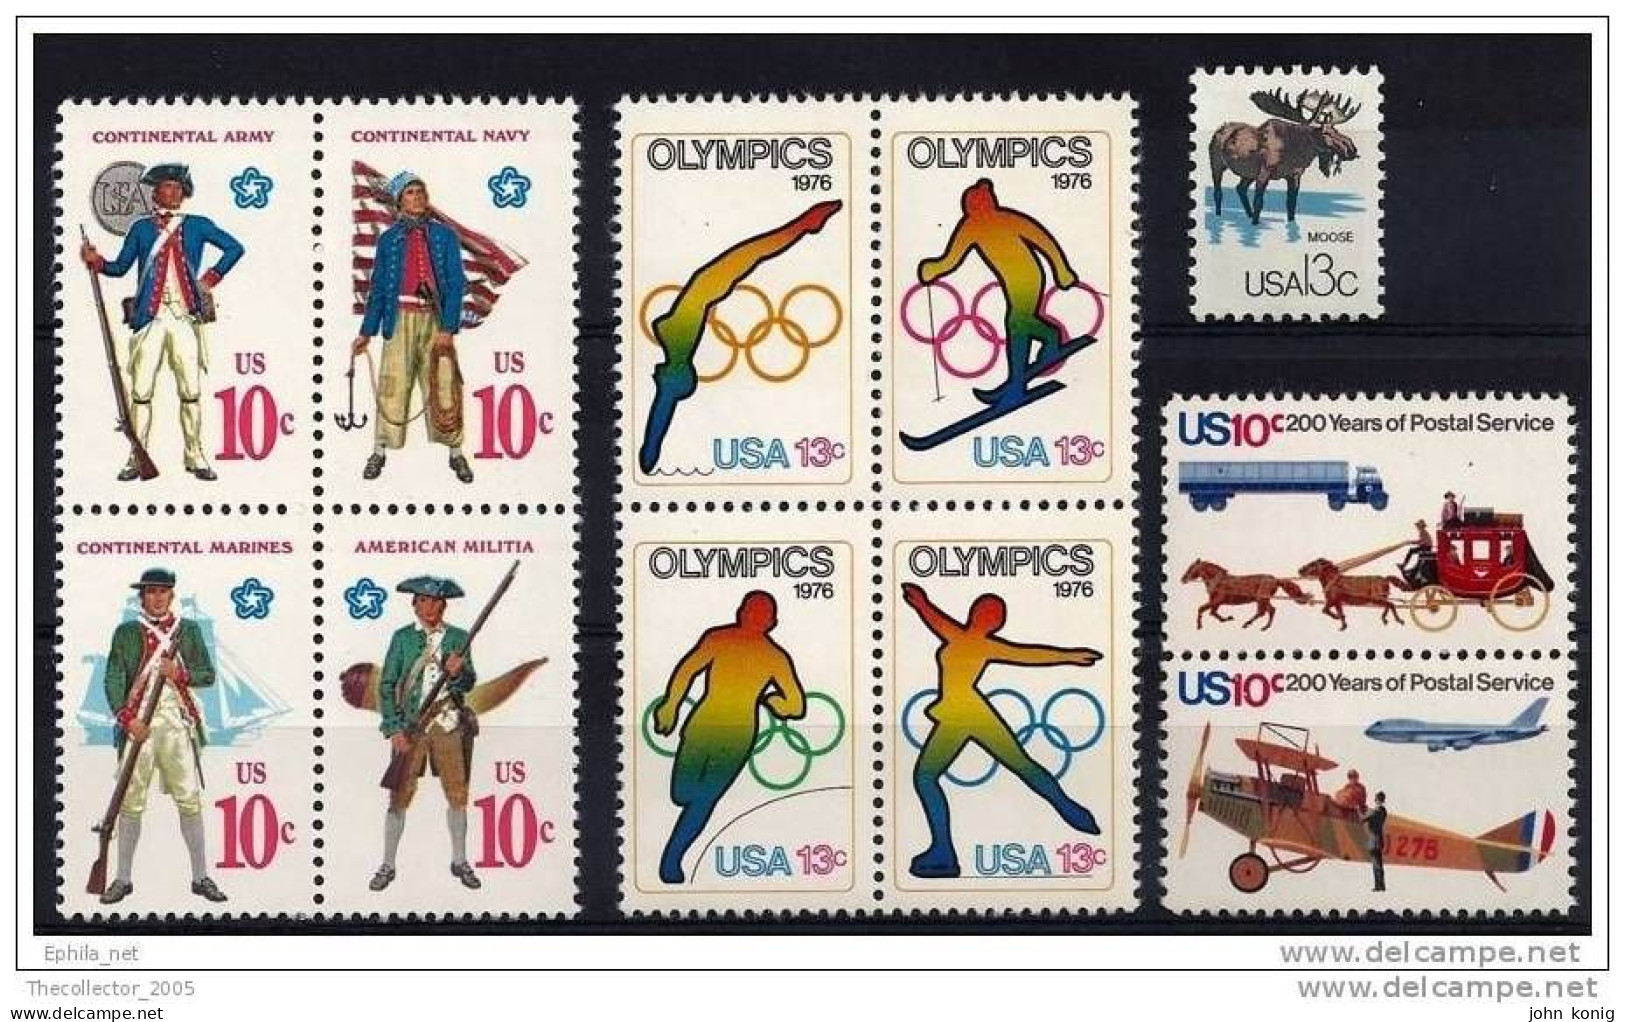 LOTTO FRANCOBOLLI - STAMPS LOT - STATI UNITI D'AMERICA - U.S.A. (UNIFORMS & OLYMPIC GAMES) - Collections